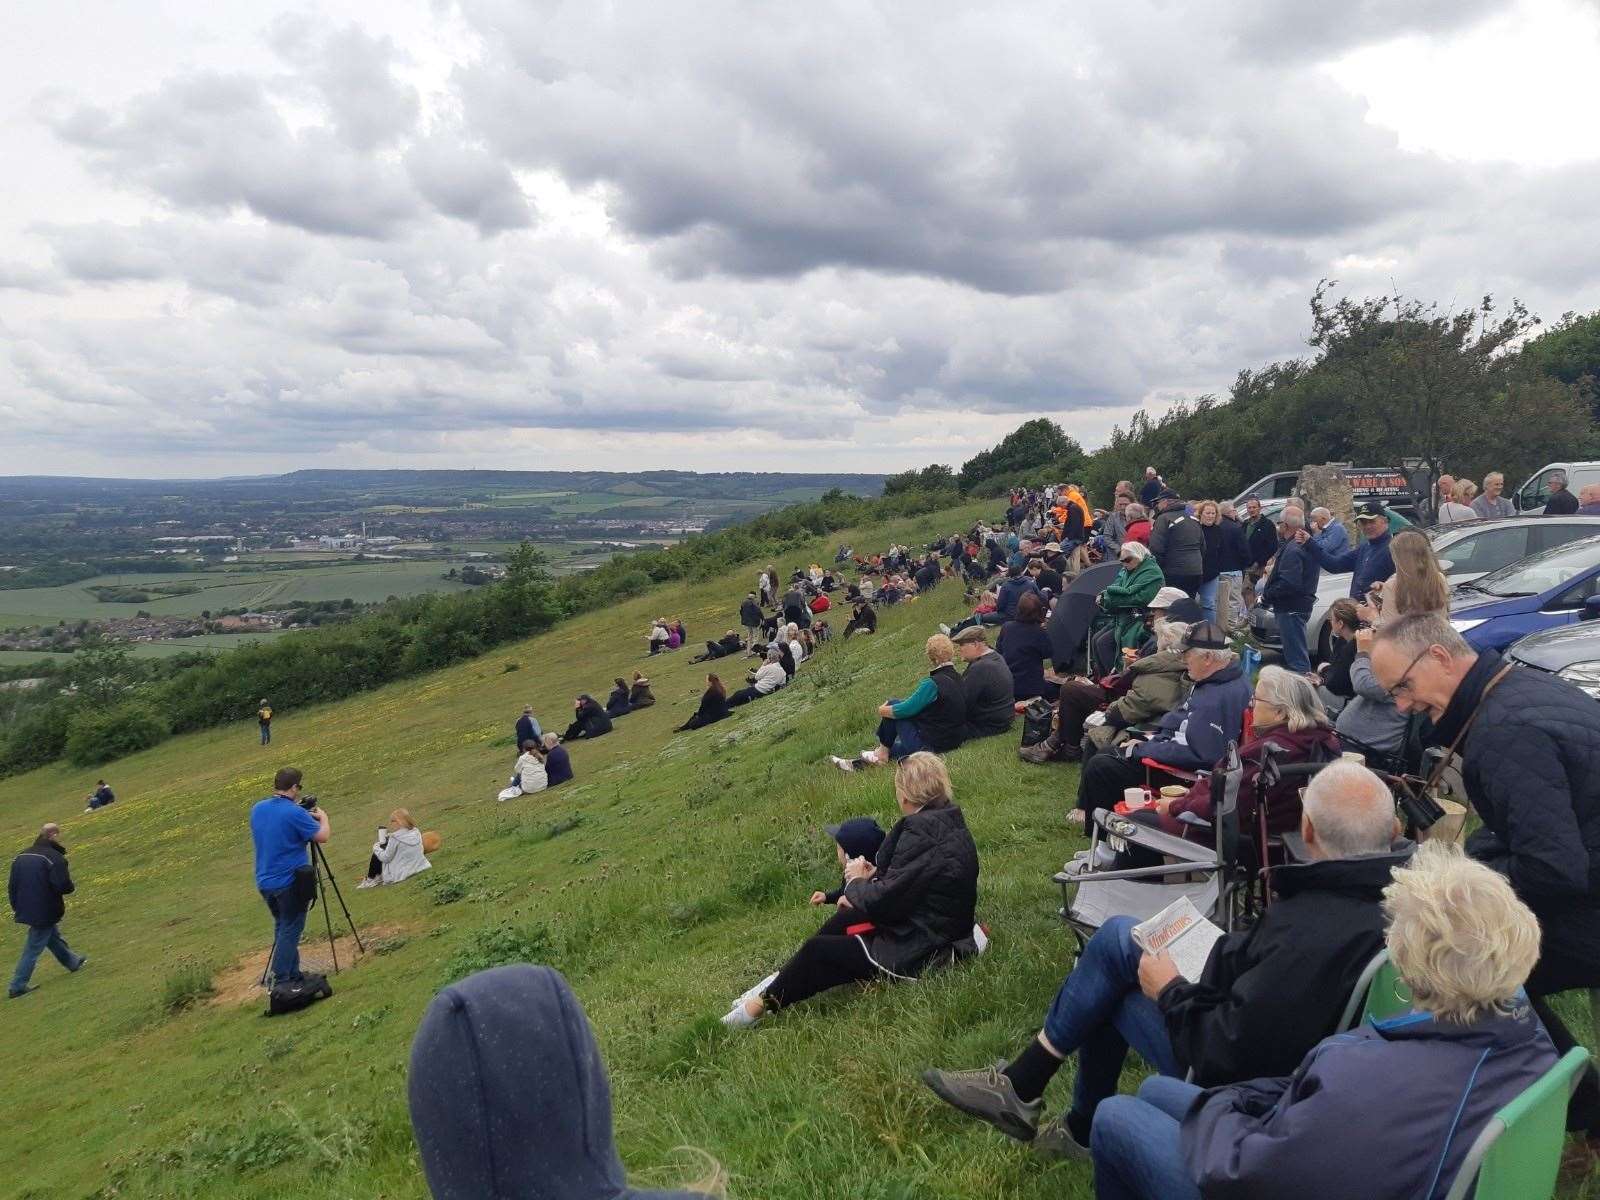 Crowds gather at Blue Bell Hill viewing site